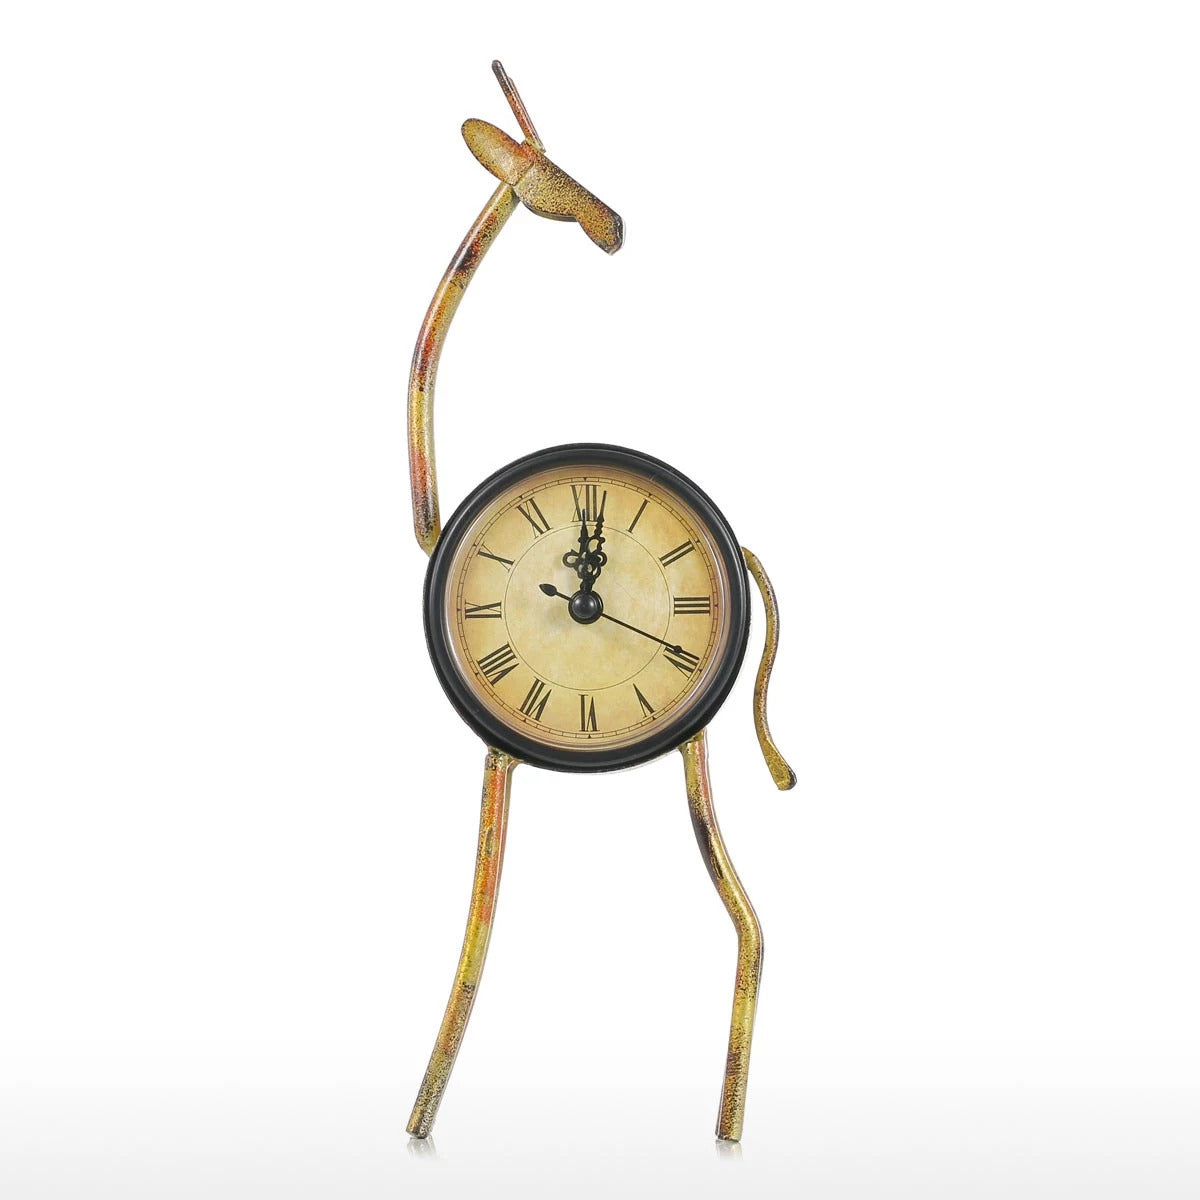 Small & Decorative Table Clock by Cat, Deer, Flamingo, Chicken, Pig